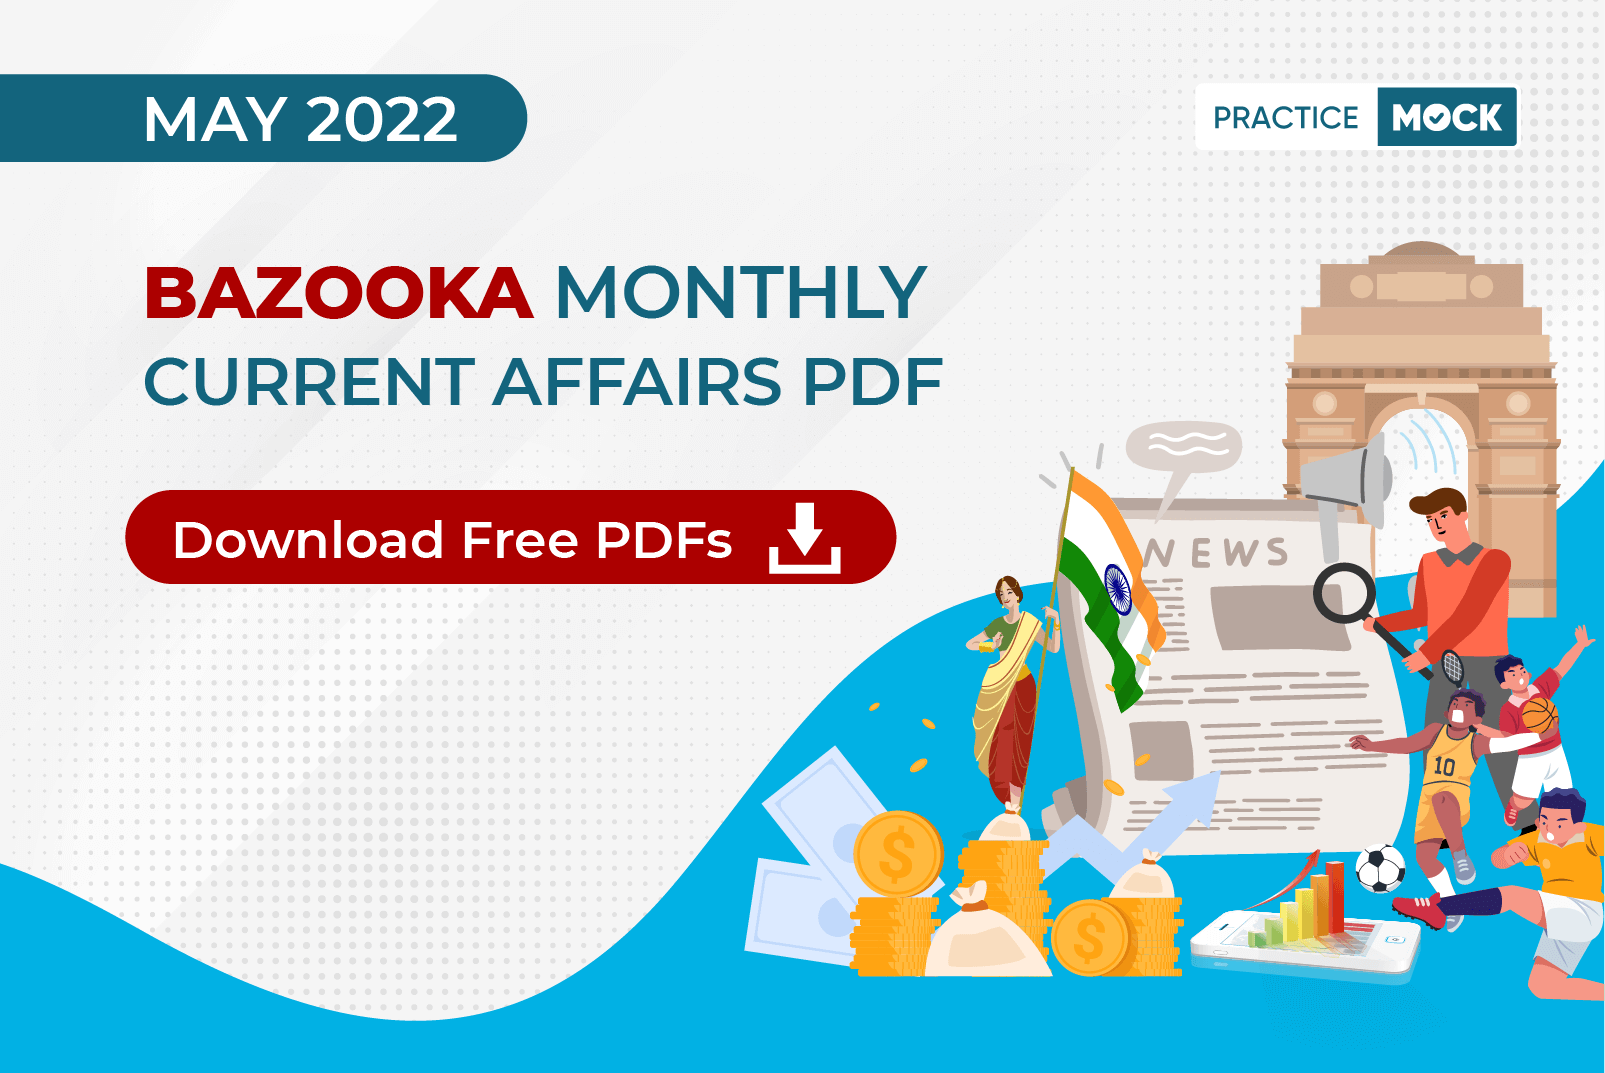 Bazooka Monthly Current Affairs PDF – May 2022